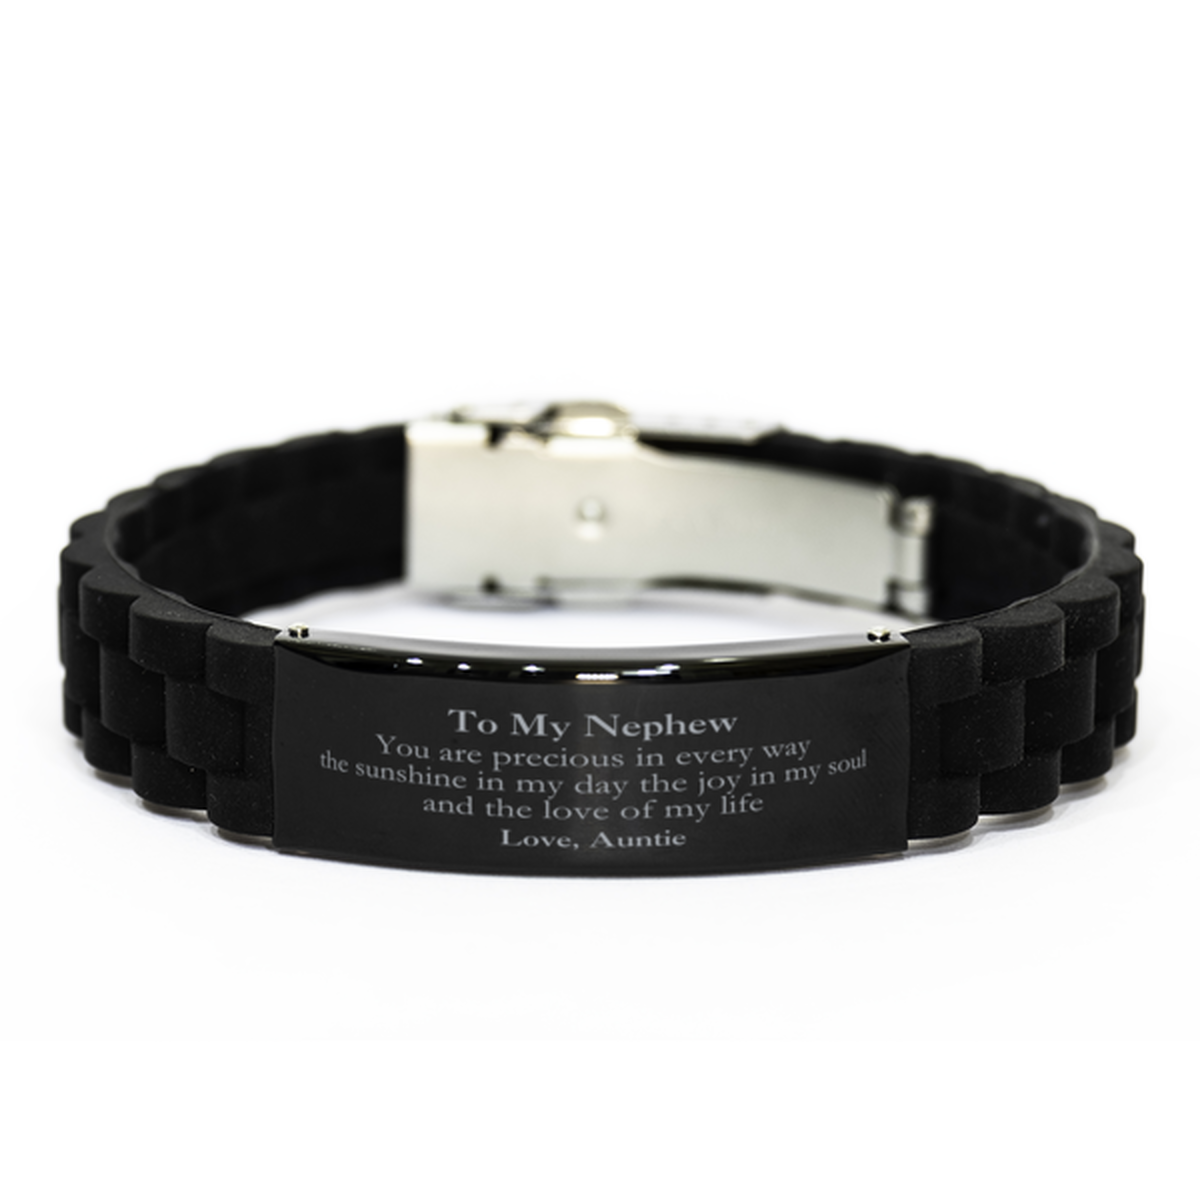 Graduation Gifts for Nephew Black Glidelock Clasp Bracelet Present from Auntie, Christmas Nephew Birthday Gifts Nephew You are precious in every way the sunshine in my day. Love, Auntie